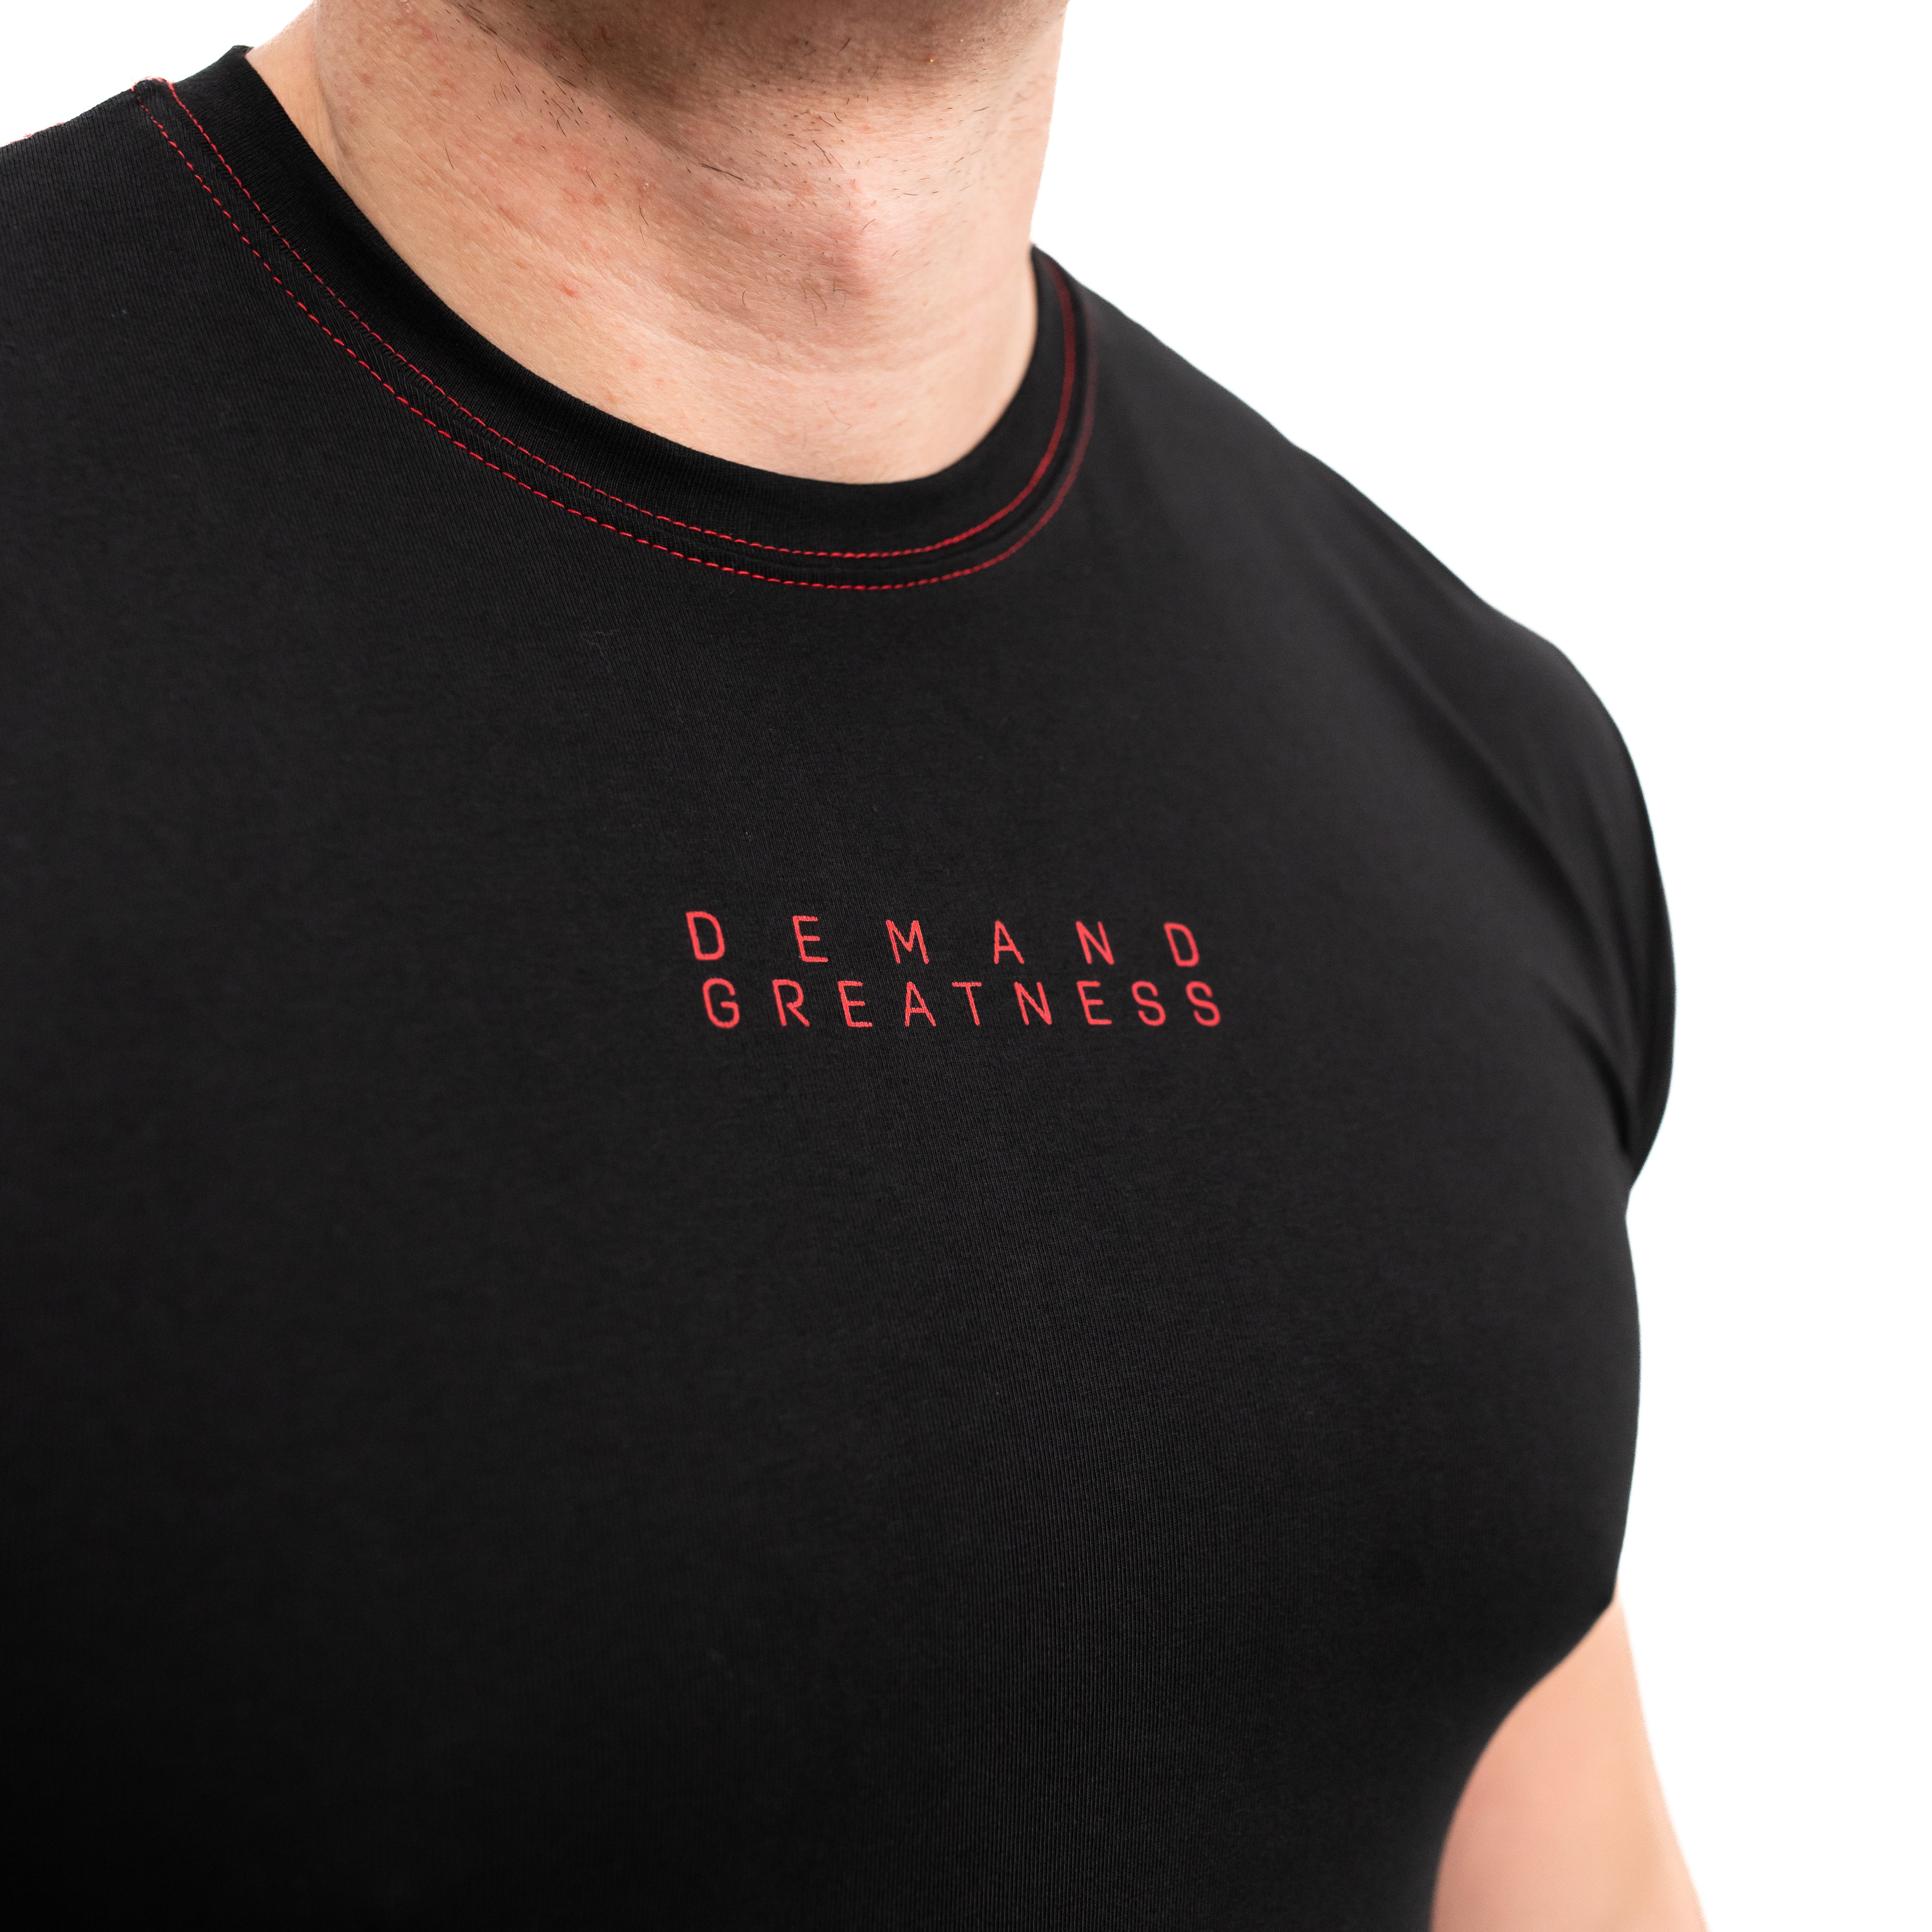 The Mantra Bar Grip Shirt reminds us we can conquer challenges and make an impact. The future is only the continuation of our progress. Purchase Mantra Bar Grip from A7 UK and A7 Europe. The silicone grip helps with slippery commercial benches and bars and anchors the barbell to your back. A7UK has the best Powerlifting apparel for all workouts. Available in UK and Europe including France, Italy, Germany, the Netherlands, Sweden and Poland.